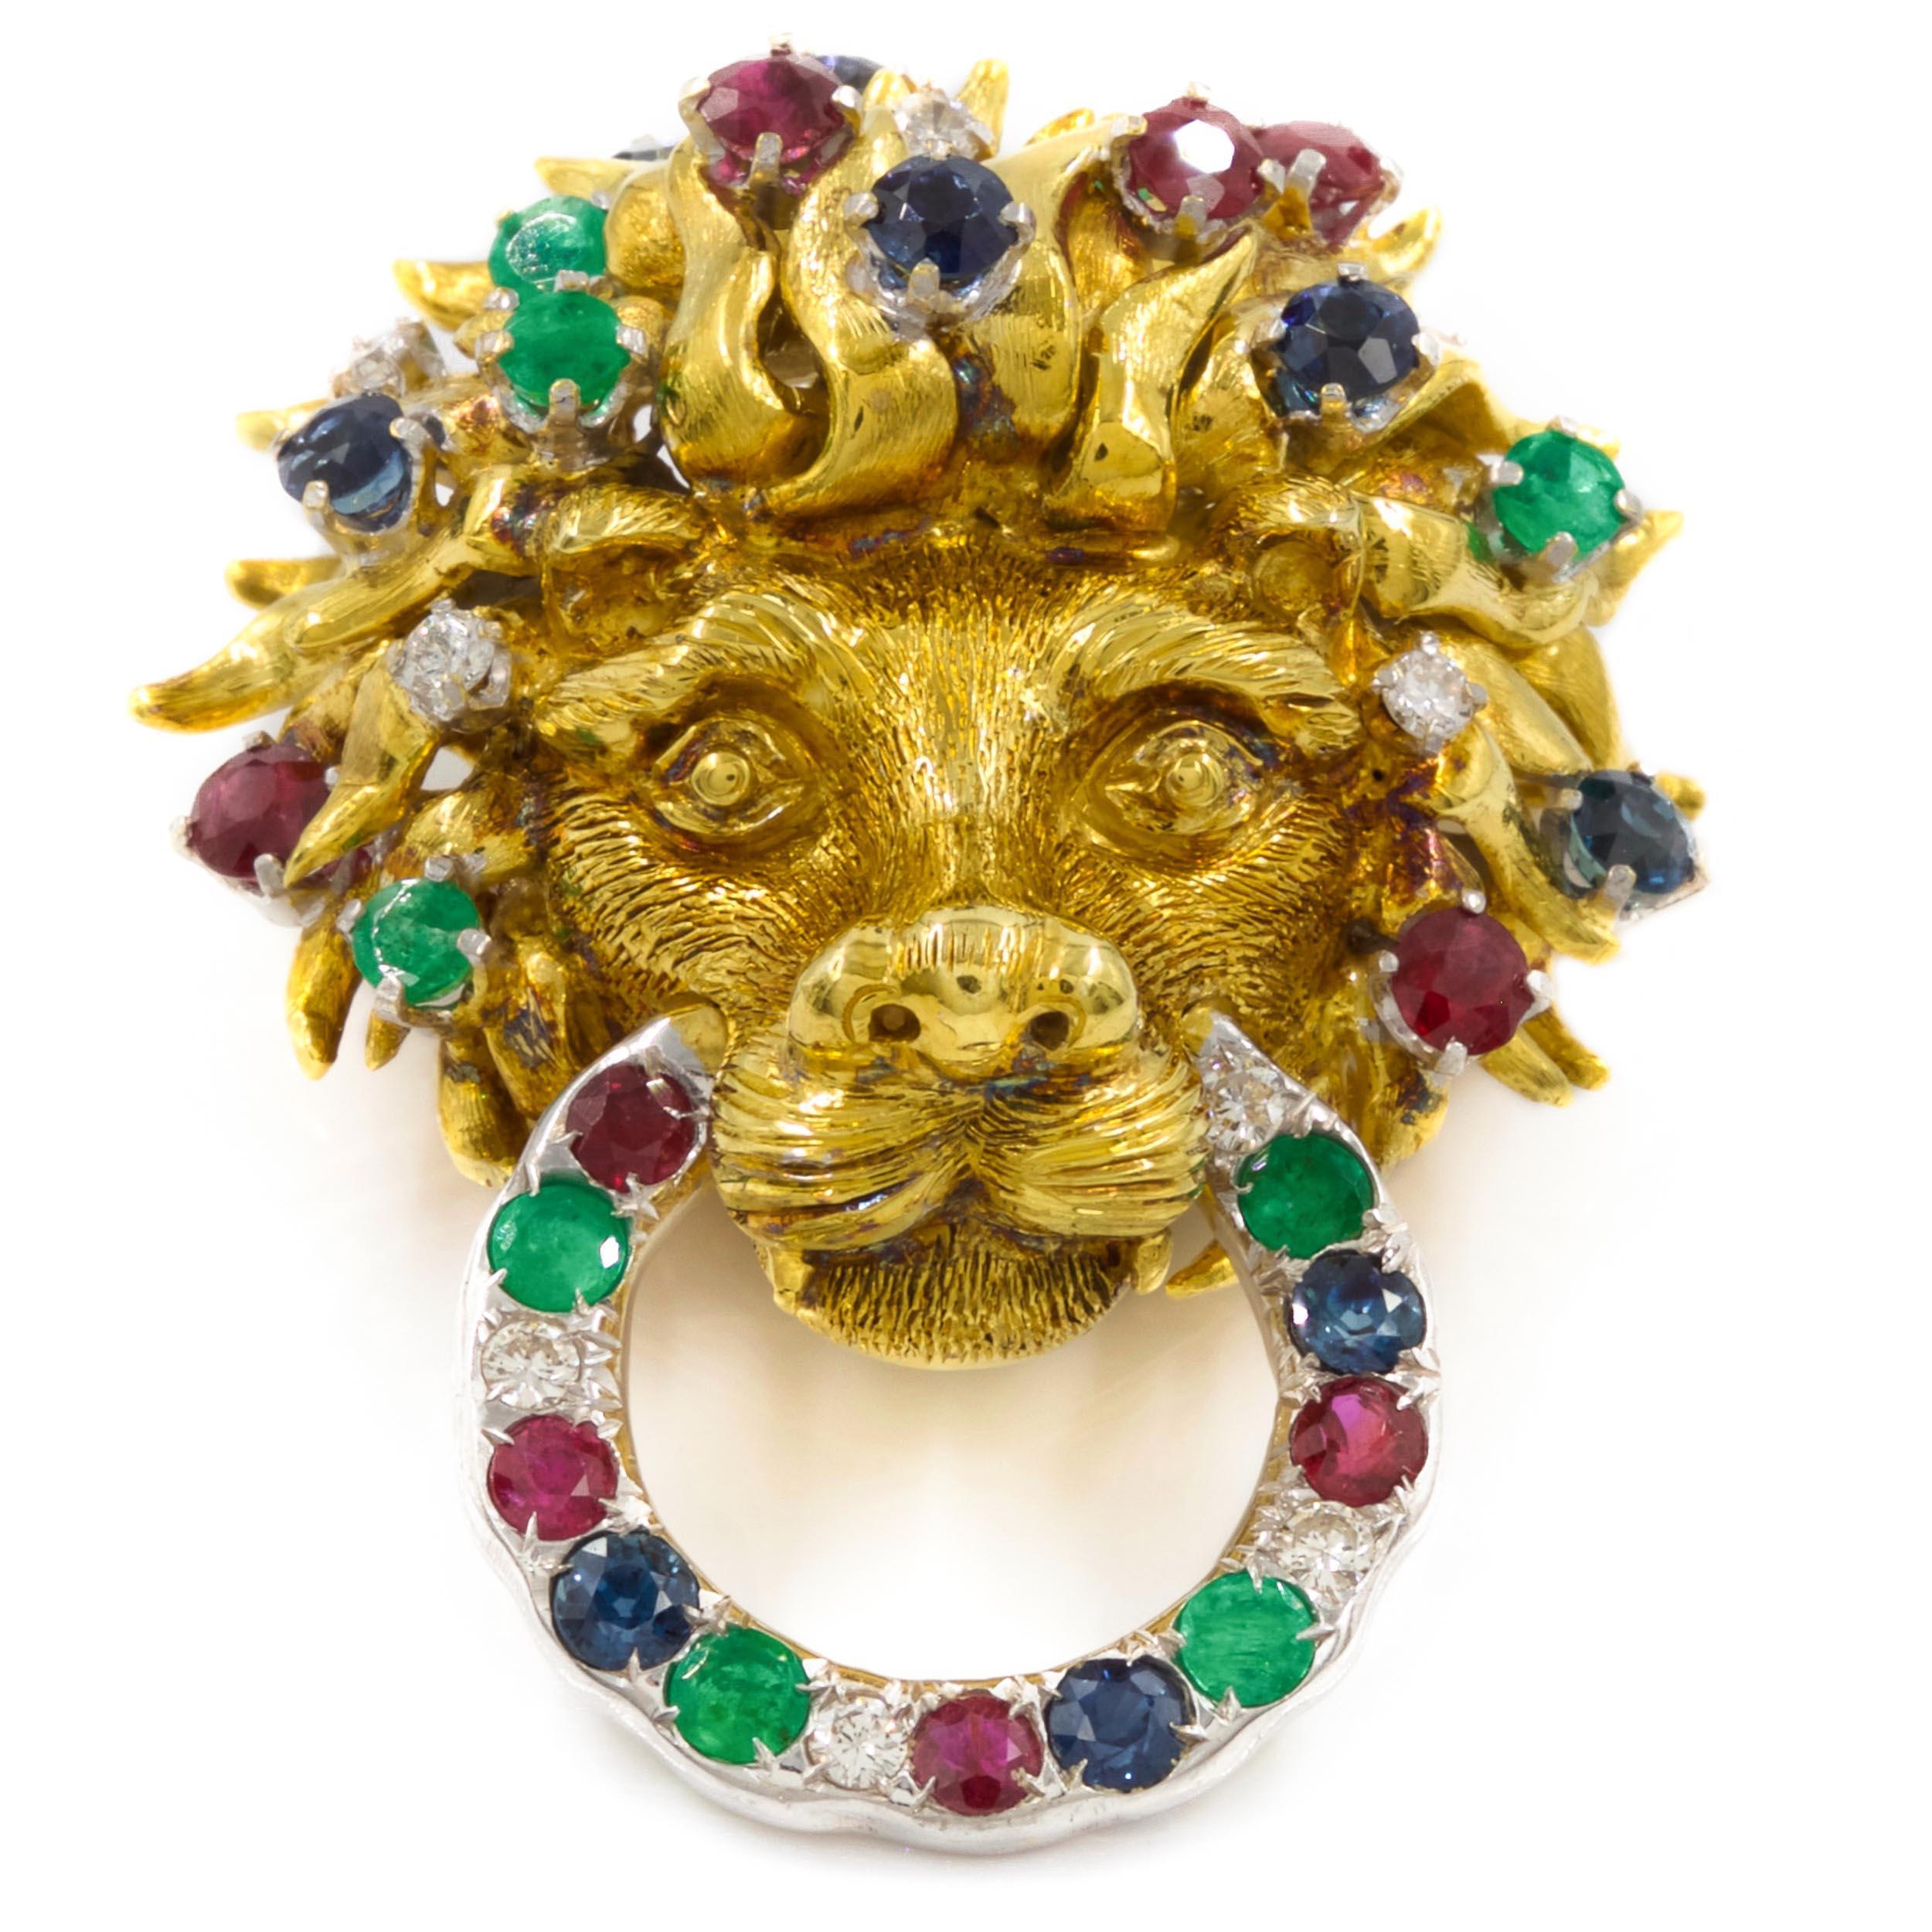 FINELY SCULPTED 18K GOLD AND GEMSET LION BROOCH (CONVERTS TO PENDANT)
With rubies, sapphires, emeralds and diamonds  marked 